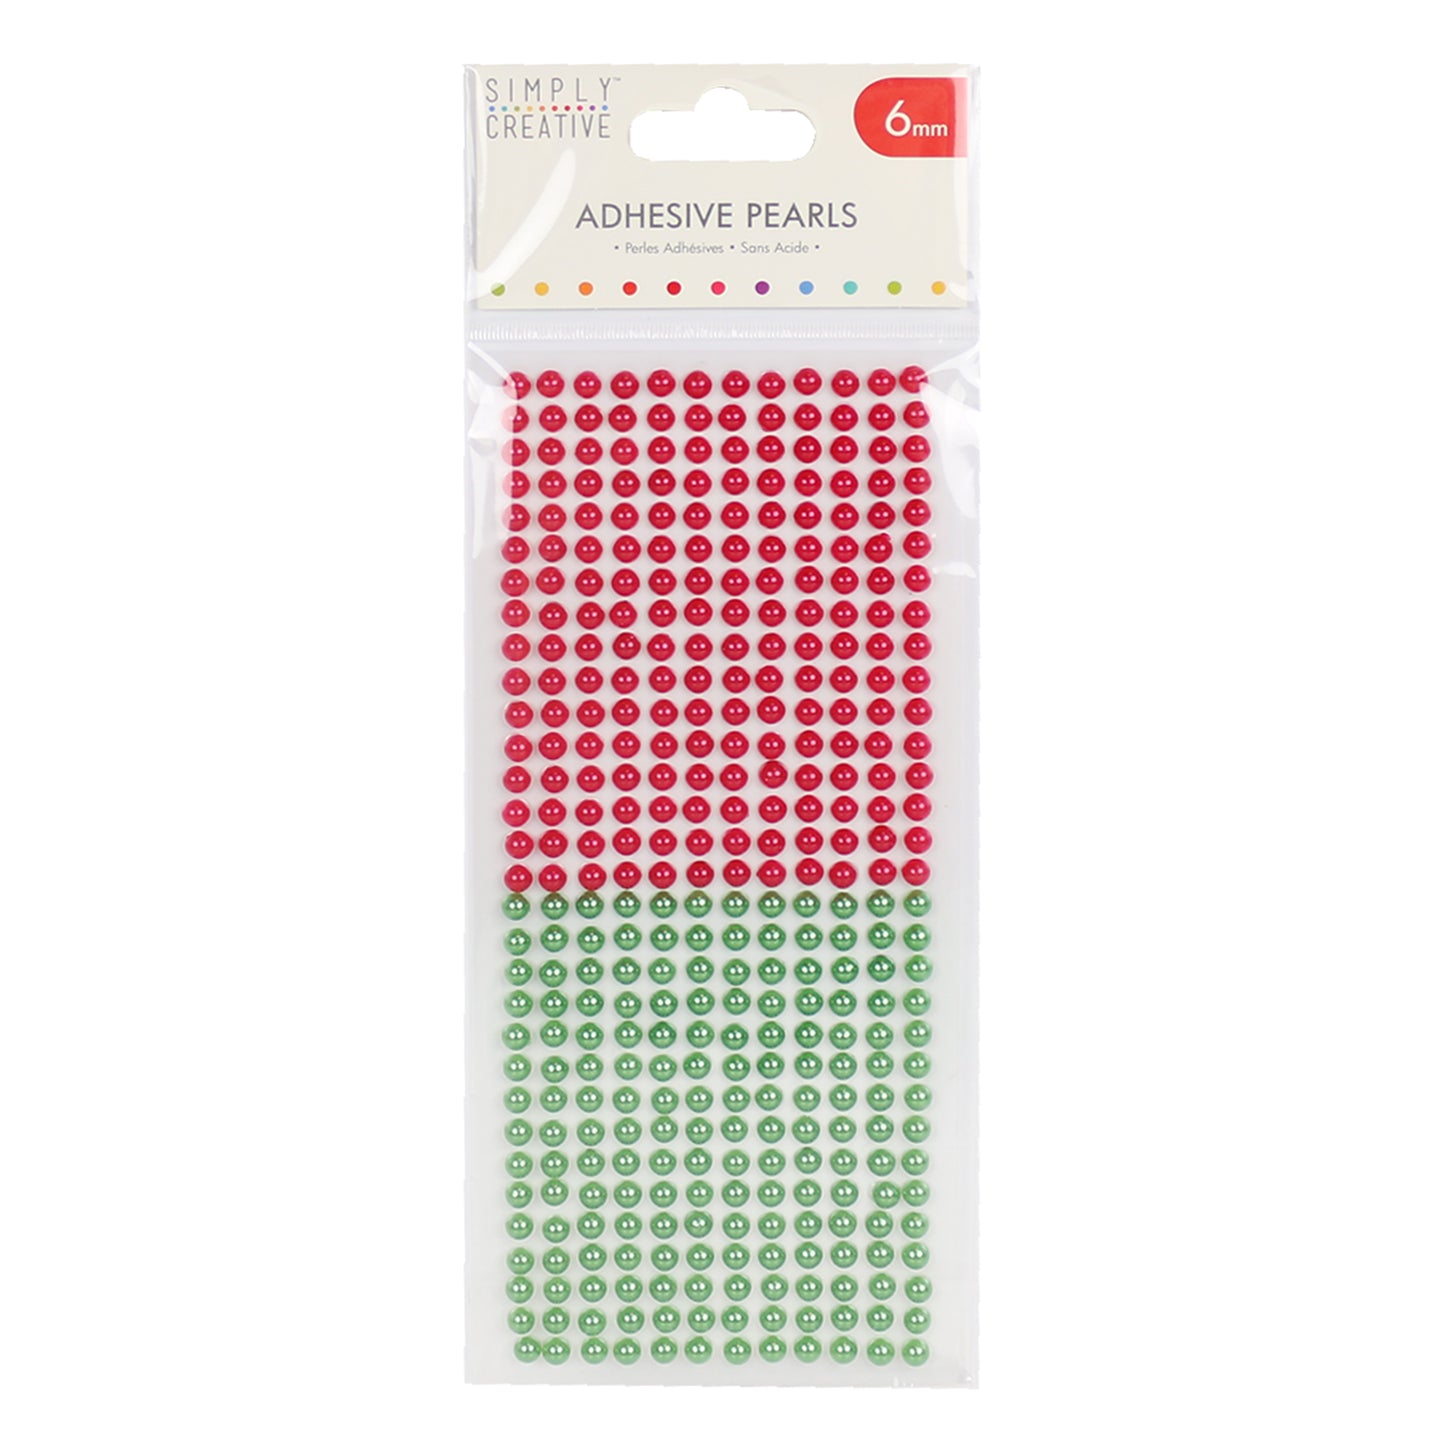 Simply Creative 6mm Pearls - 372 Pack Red / Green